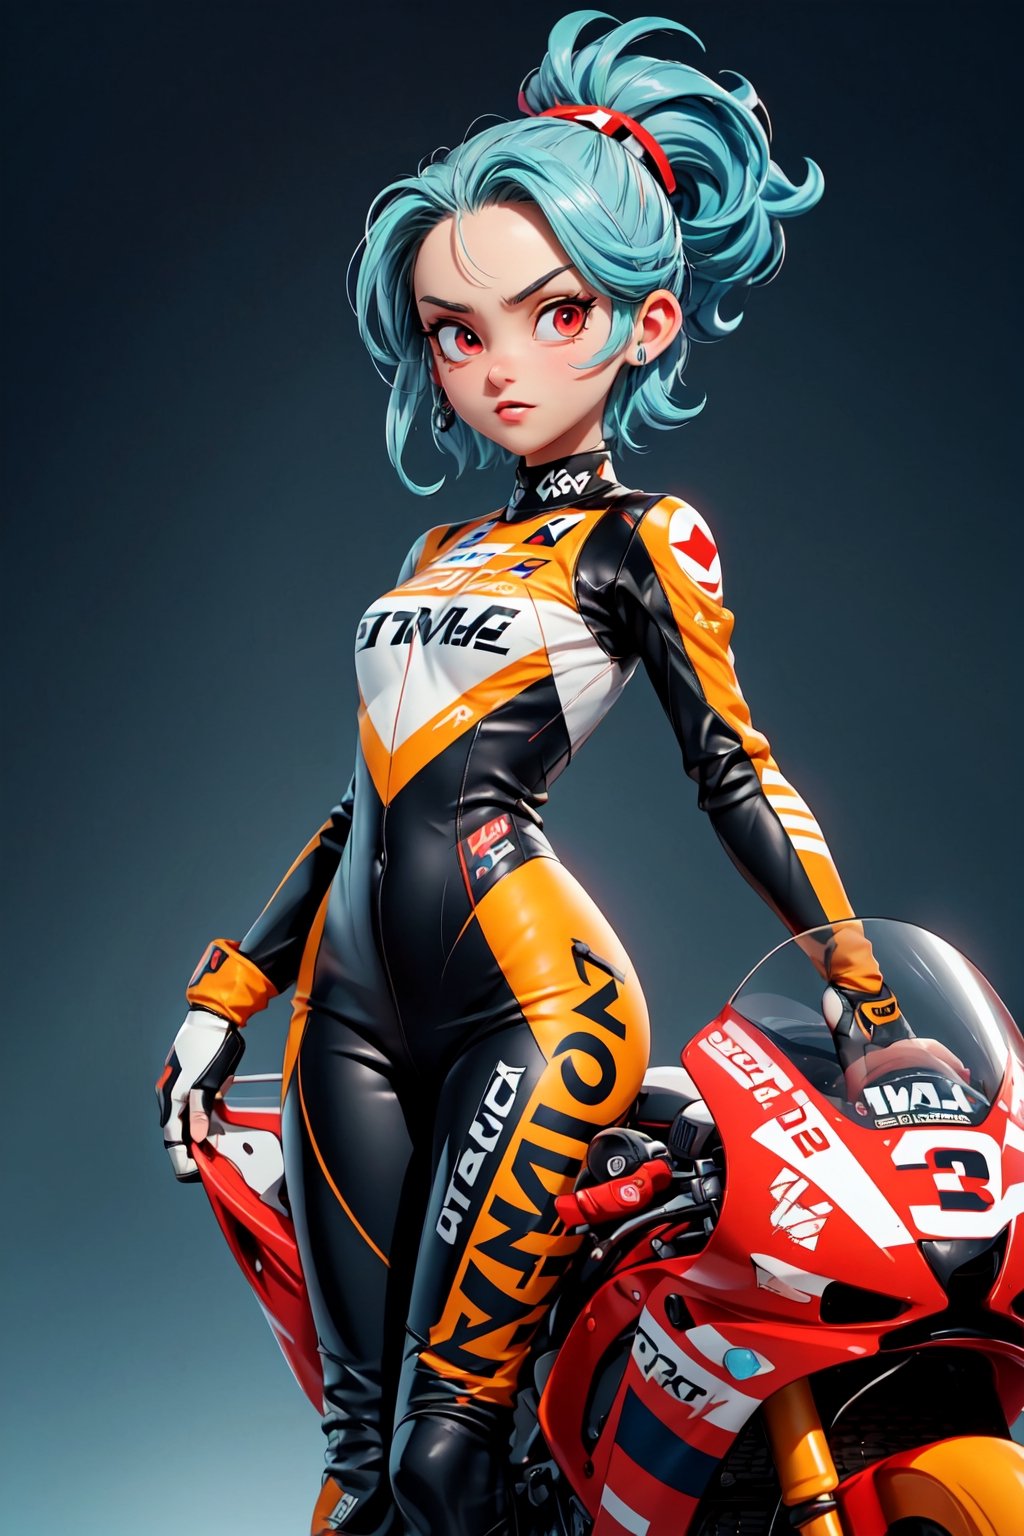 (best quality), (UHQ, 8k, high resolution), Generate a pixel art masterpiece featuring a solo anime girl with a sporty, moto-inspired aesthetic. The character boasts vibrant, electric blue hair, and her red eyes gleam with intensity. Dressed in a cutting-edge MotoGP racing suit with sleek sponsor logos, she strikes a dynamic and confident pose. The atmosphere should convey a thrilling sense of speed and victory, with the character radiating charm and charisma, subtly expressing a connection with the viewer. Ensure the pixel art is of ultra resolution, adopting a dynamic aspect ratio, and capturing the essence of 'simple --niji' and 'kpop girl' styles. Emphasize the character's forehead, sleek physique, and infuse the scene with an energetic and endearing expression.